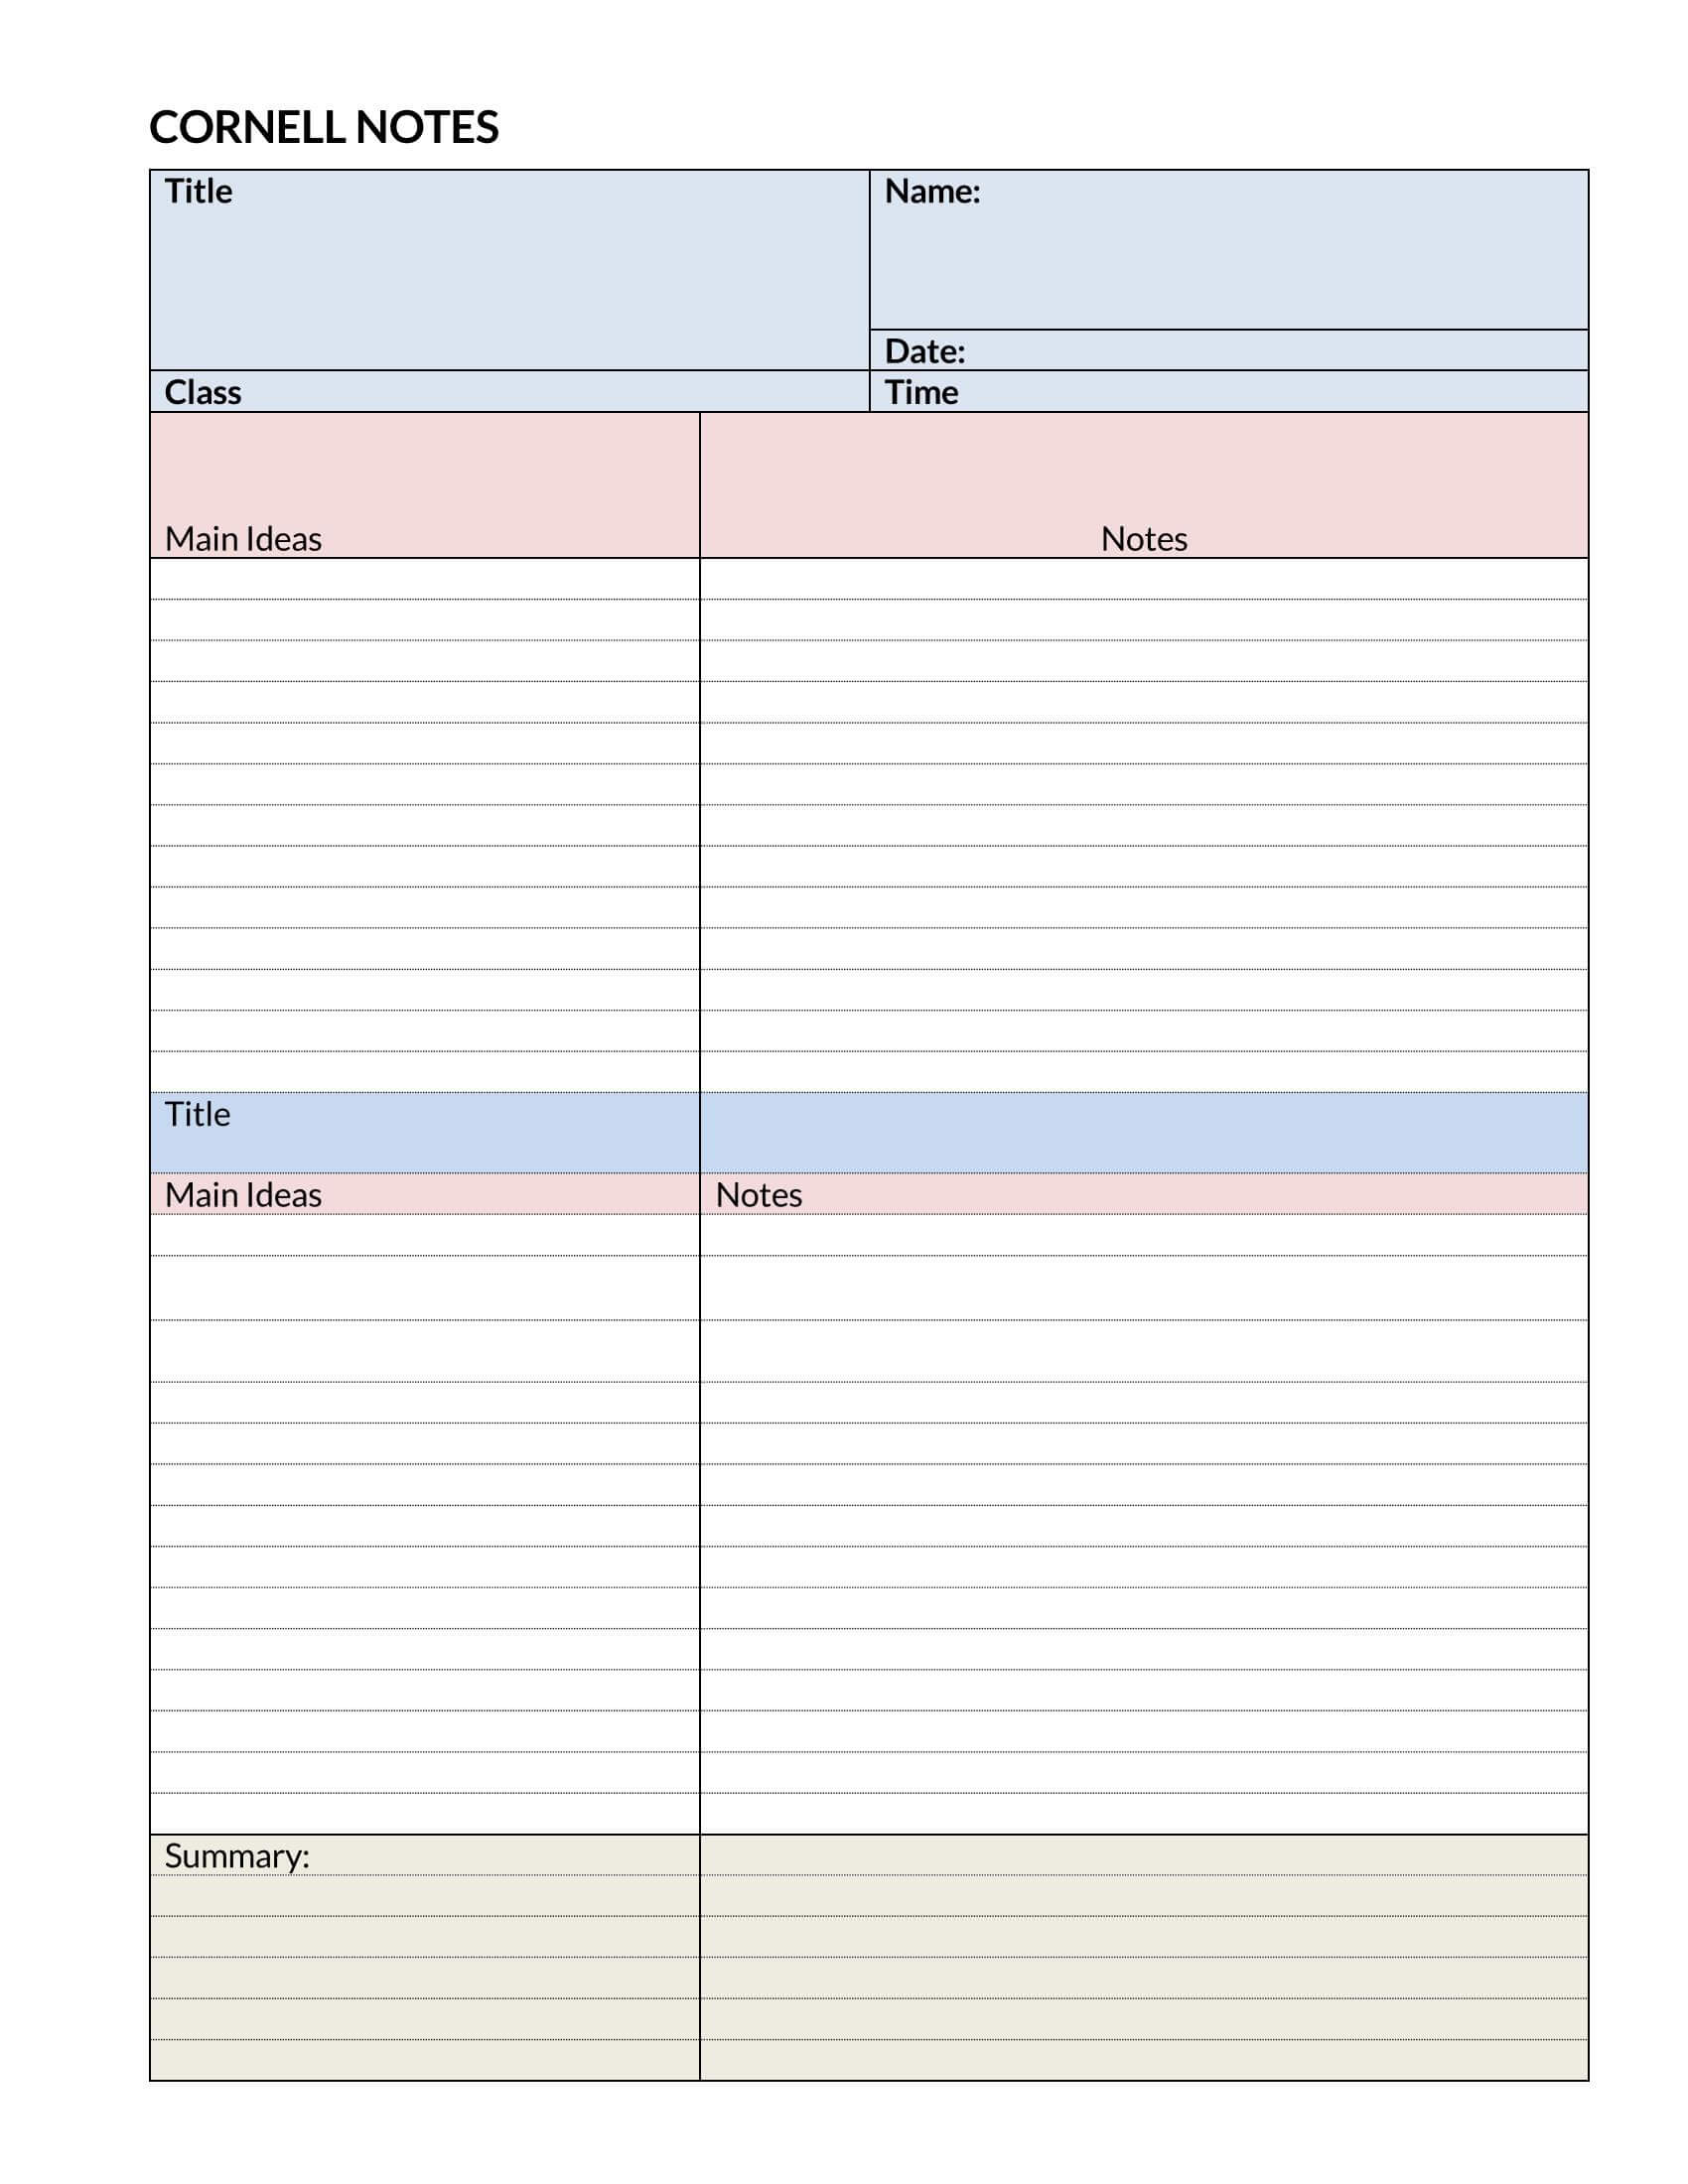 Professional Cornell Note Template Word